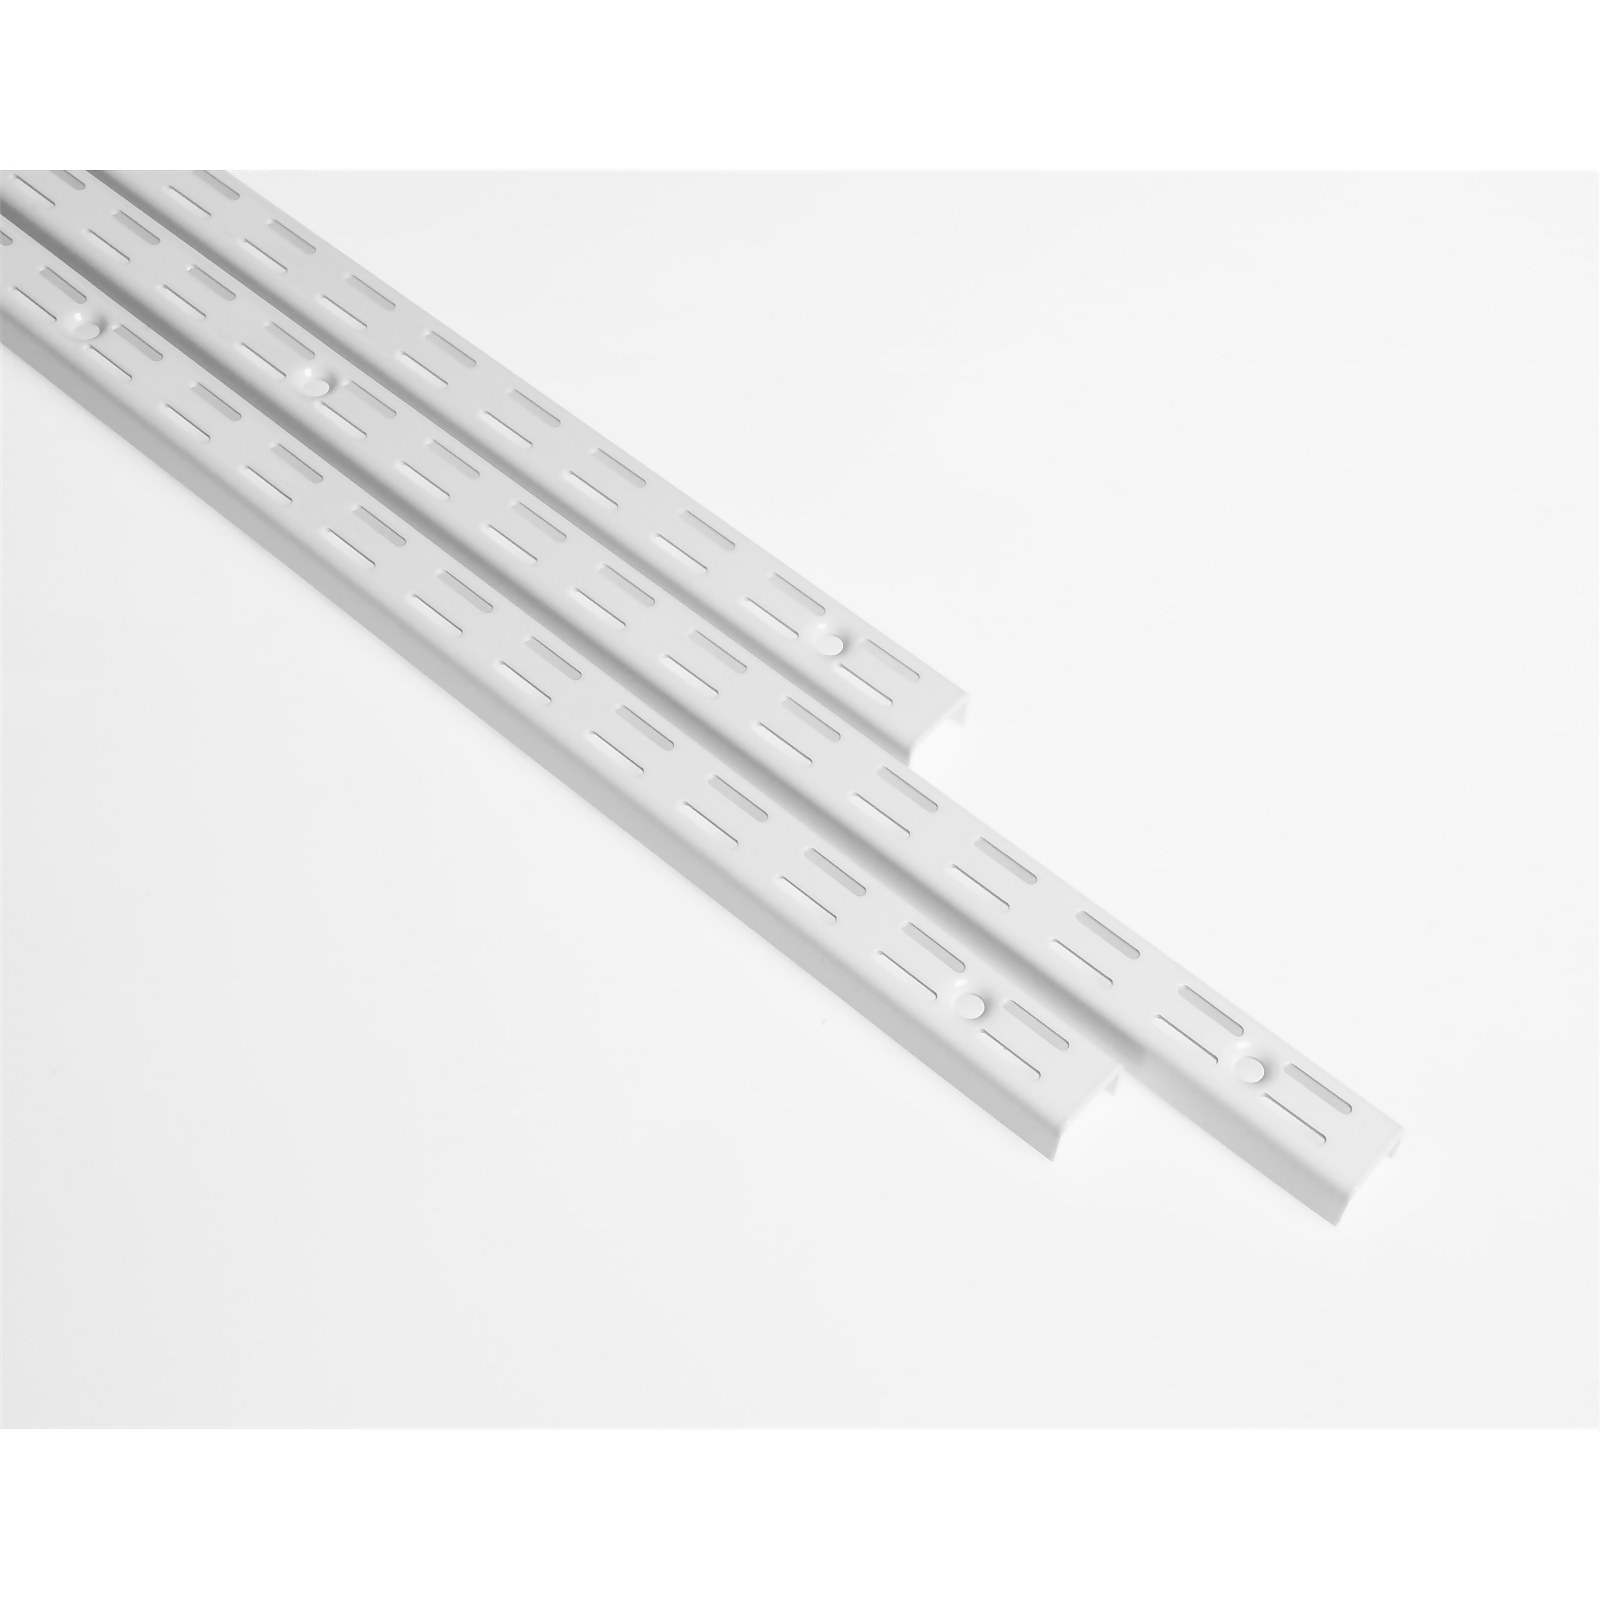 Photo of Anti-bacterial Twin Slot Shelving Kit - 1600mm White Twinslot And 270mm Brackets - White